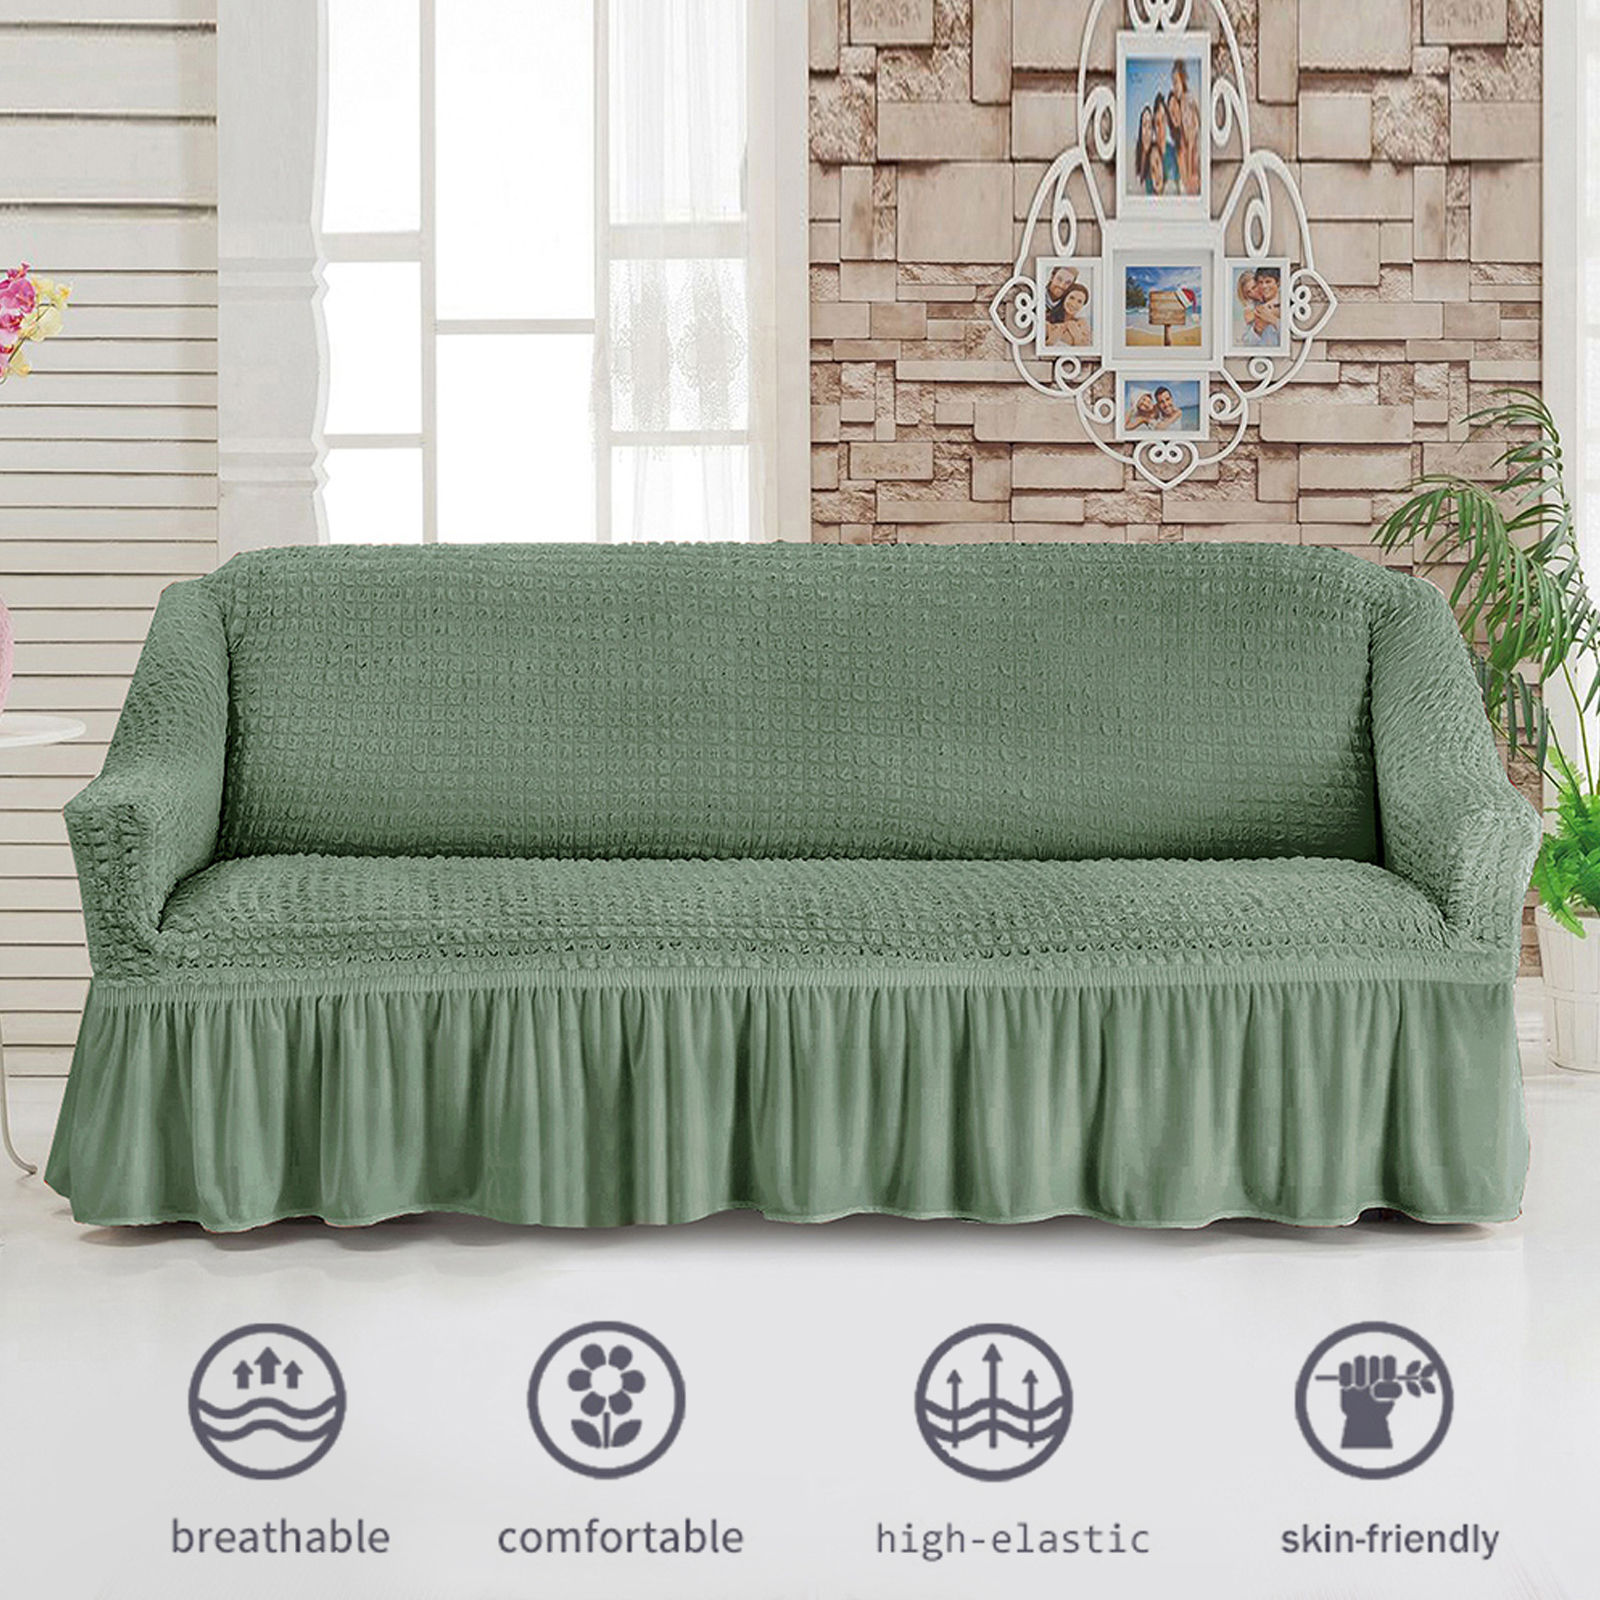 Stretch Sofa Slipcover, 3 Seater Sofa Slipcovers With Skirt With Armless Soft Sofa Cover Elastic Straps Sofa Slipcover For Living Room Kids Pets-Green B-Large